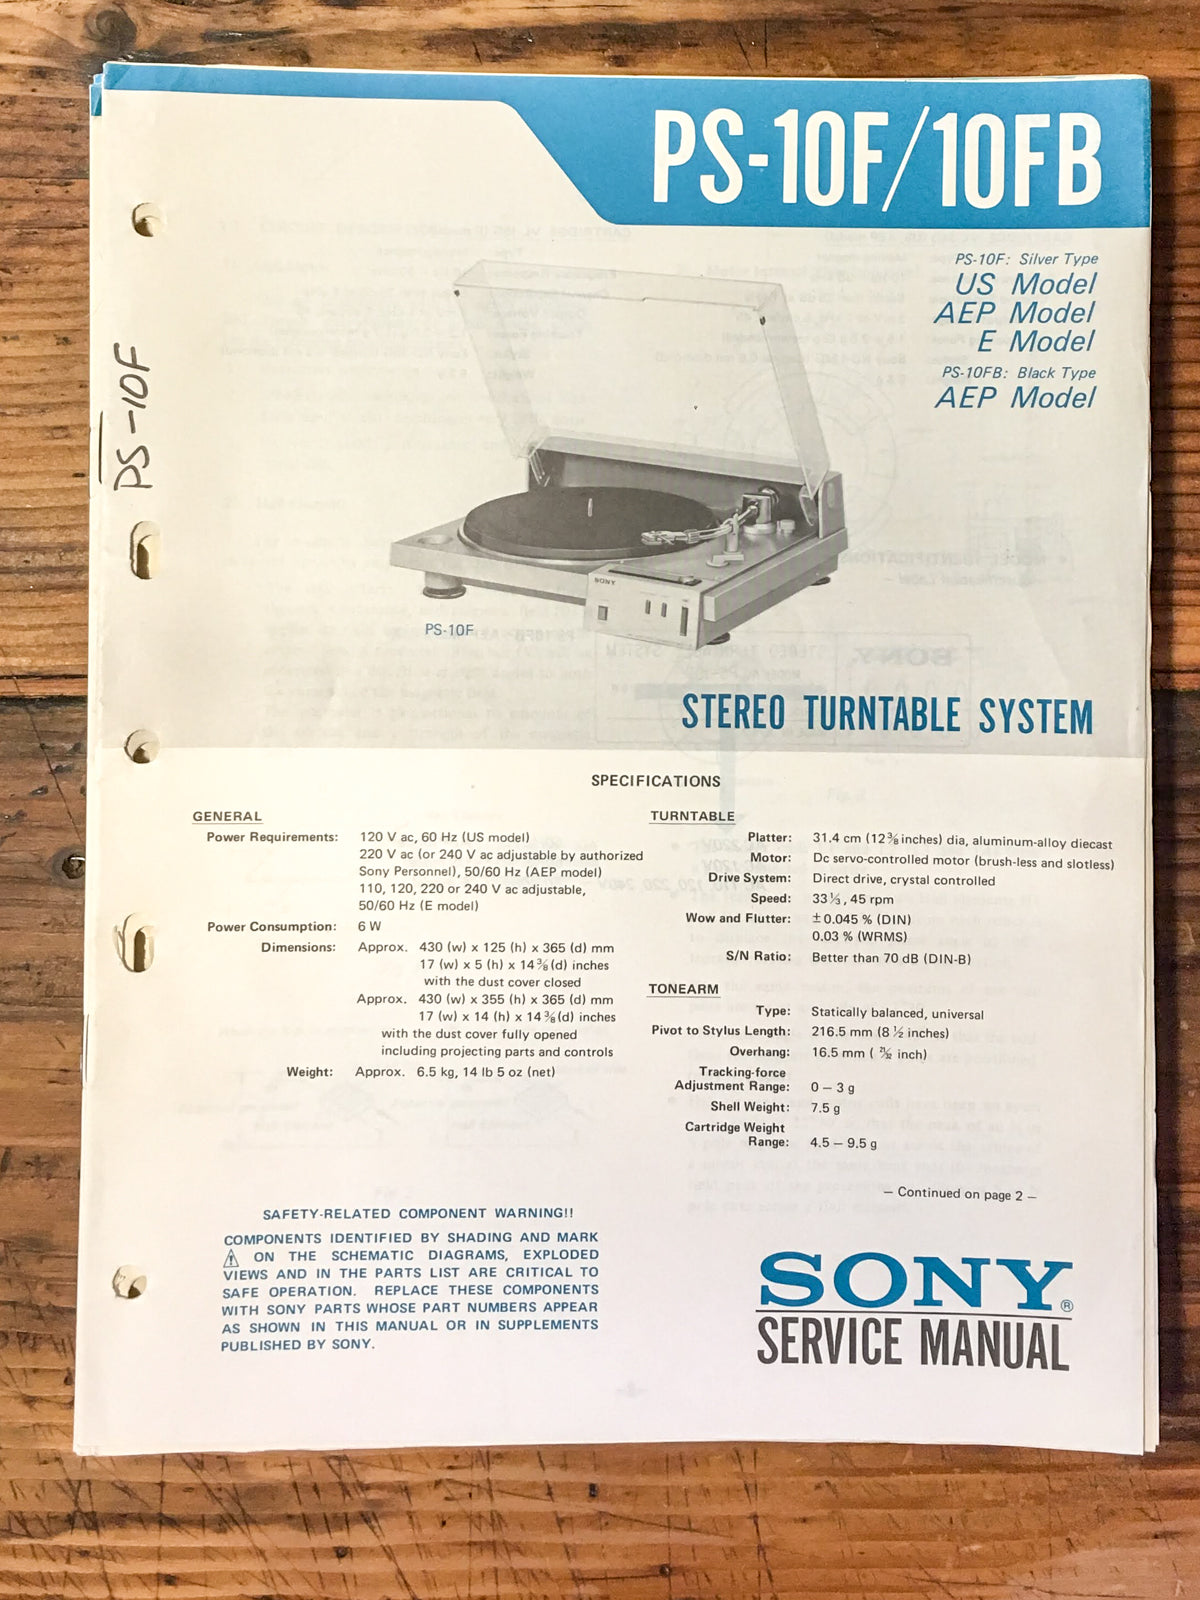 Sony PS-10F PS-10FB Record Player / Turntable Service Manual *Original*